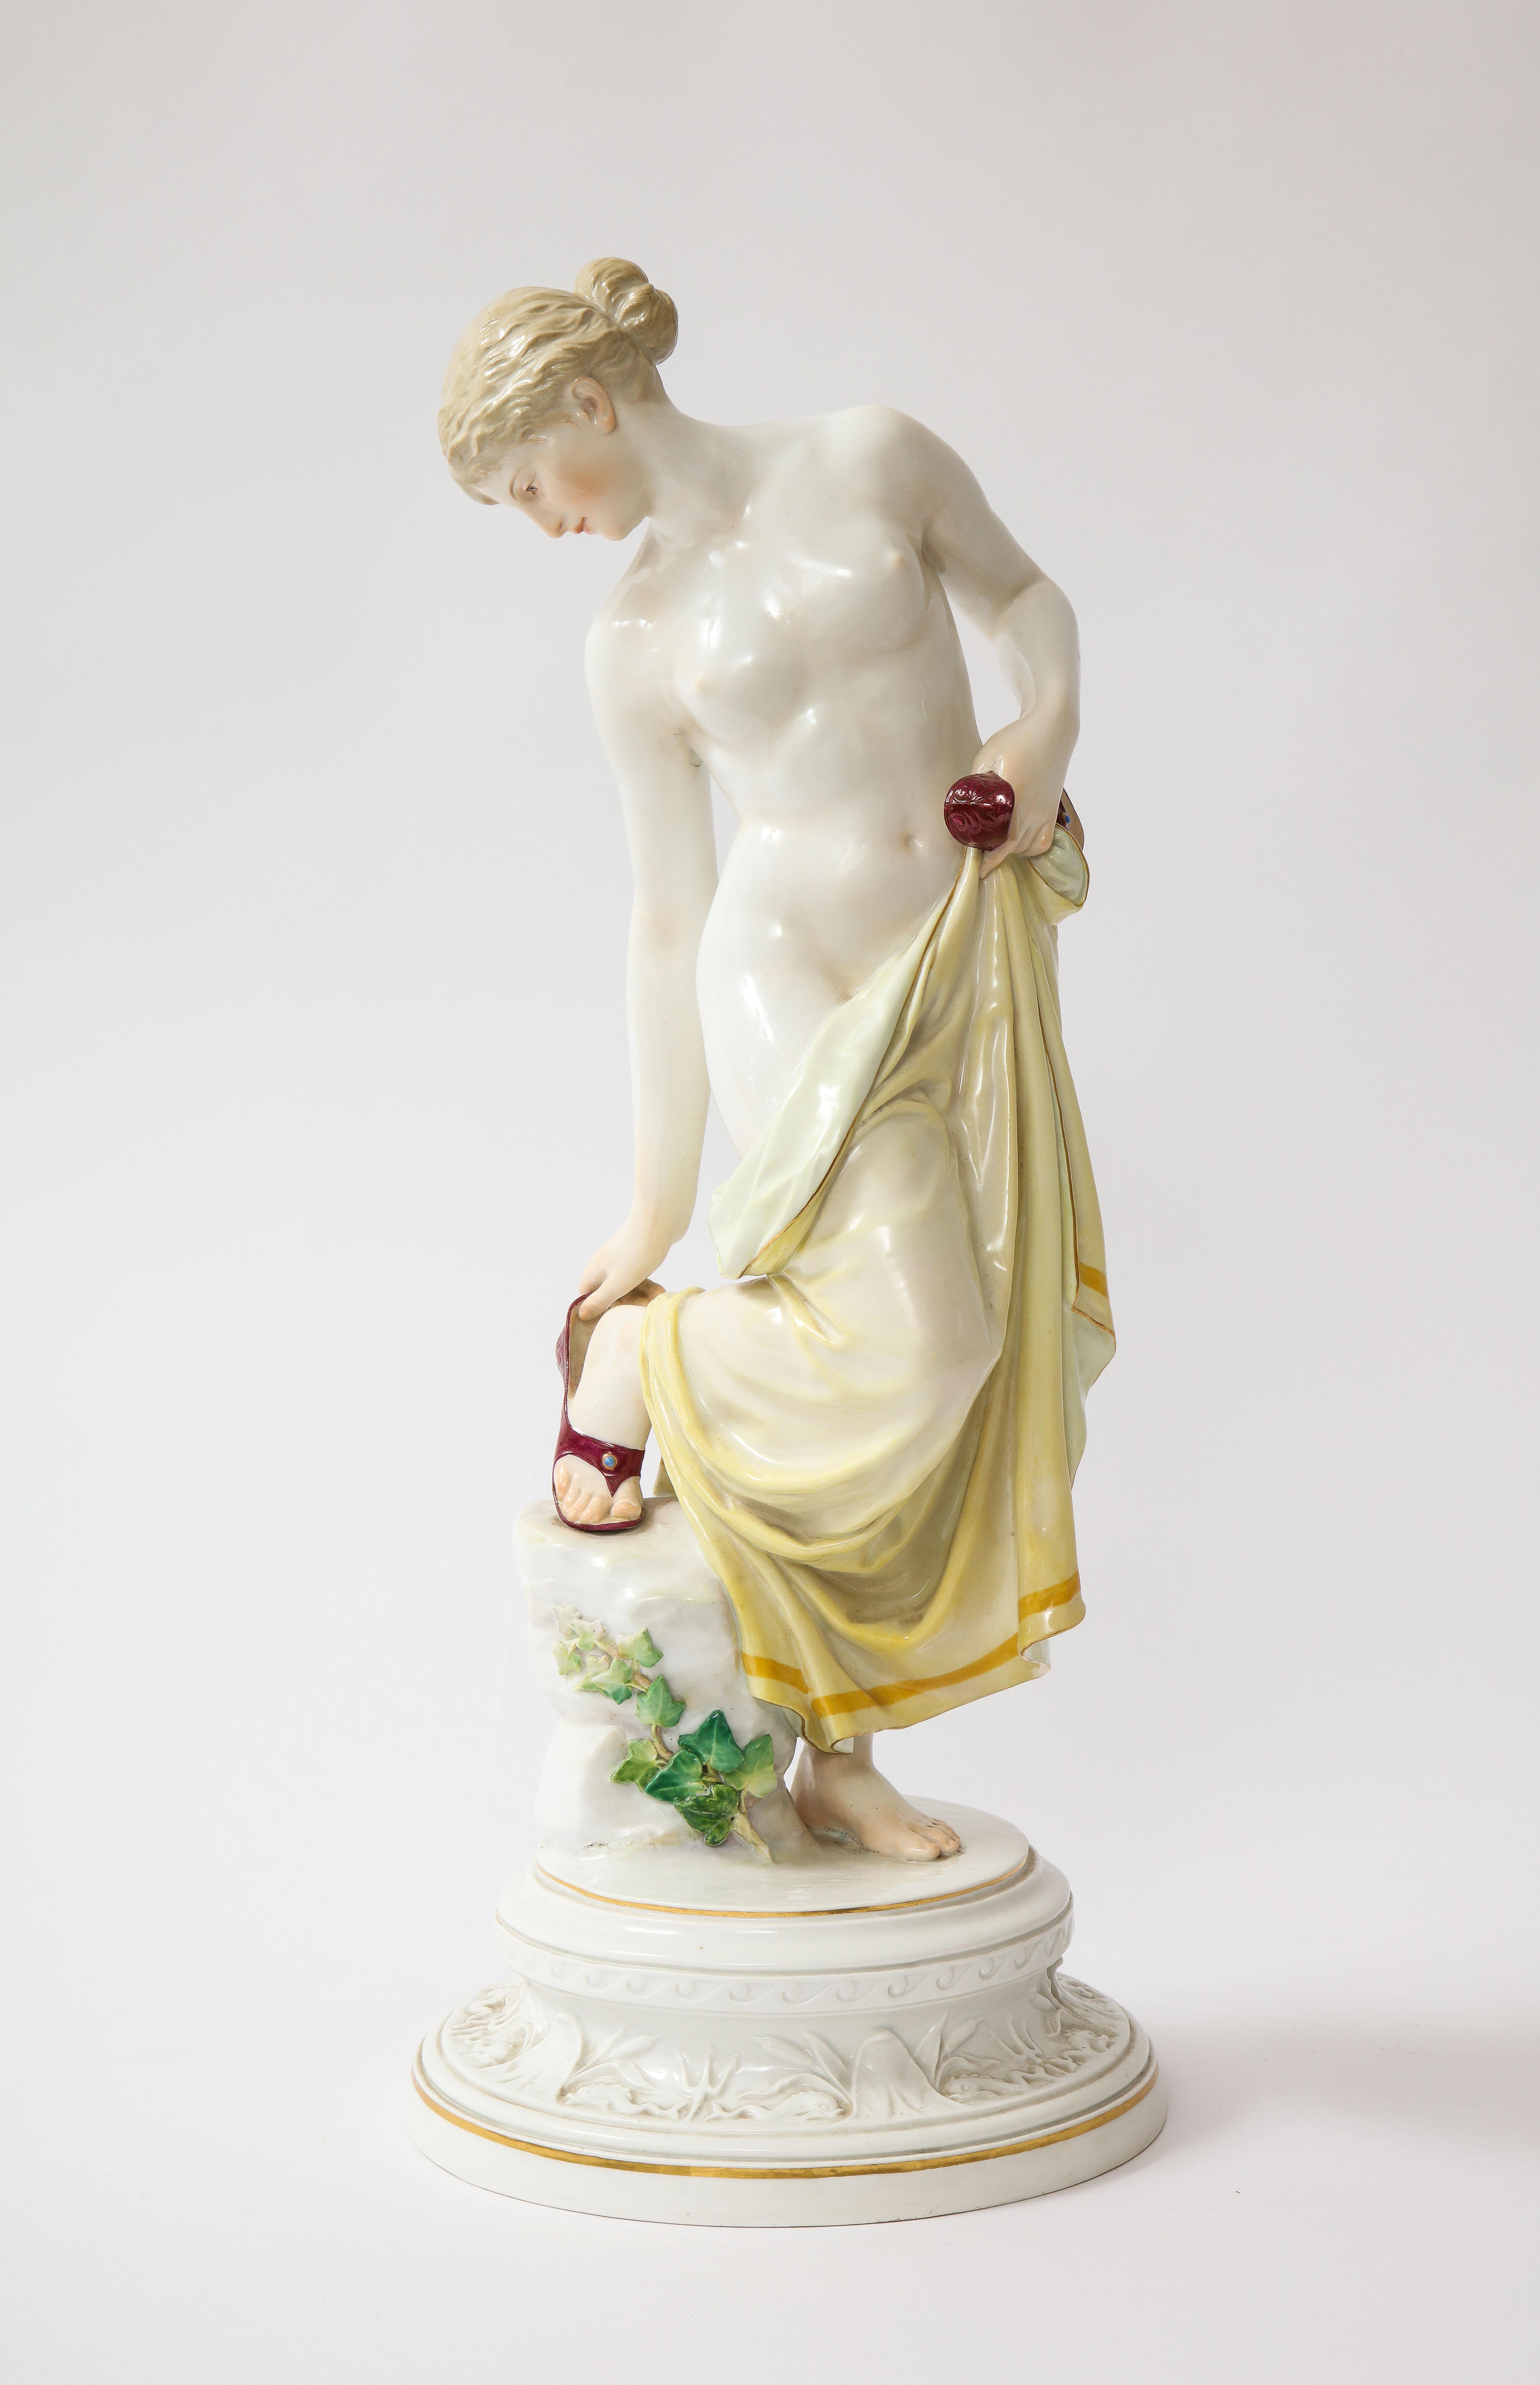 A 19th C. Meissen Porcelain Female Nude Figurine After The Bath, M 193b, R. Ockelmann.  This exquisite porcelain sculpture was skillfully created by the talented artist R. Ockelmann.  The figurine portrays a partially nude woman, her visage